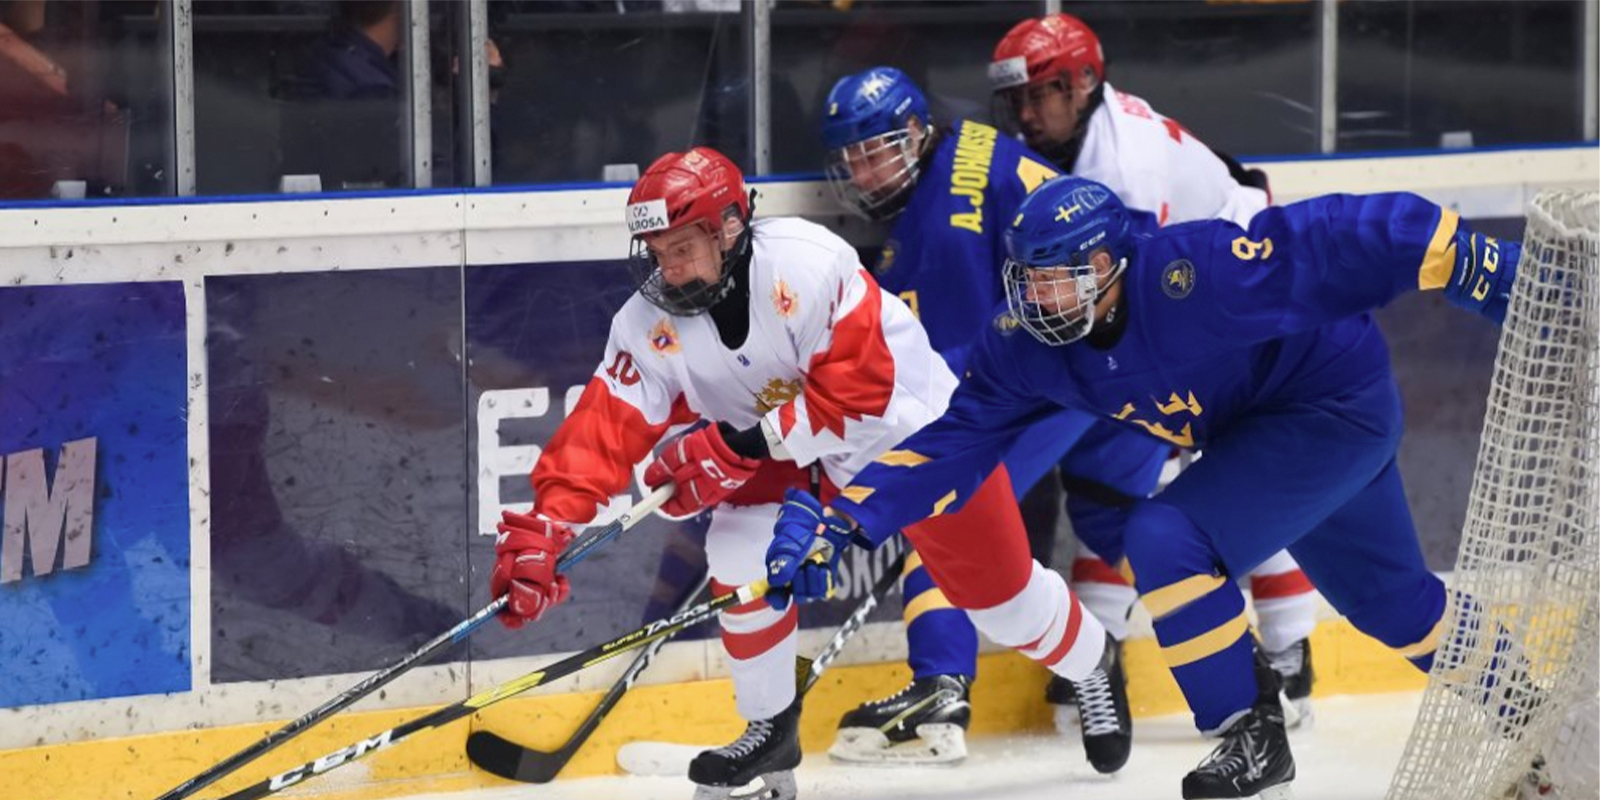 A player from Sweden battles a player from Russia for possession of the puck at the U18 World Junior Championships.